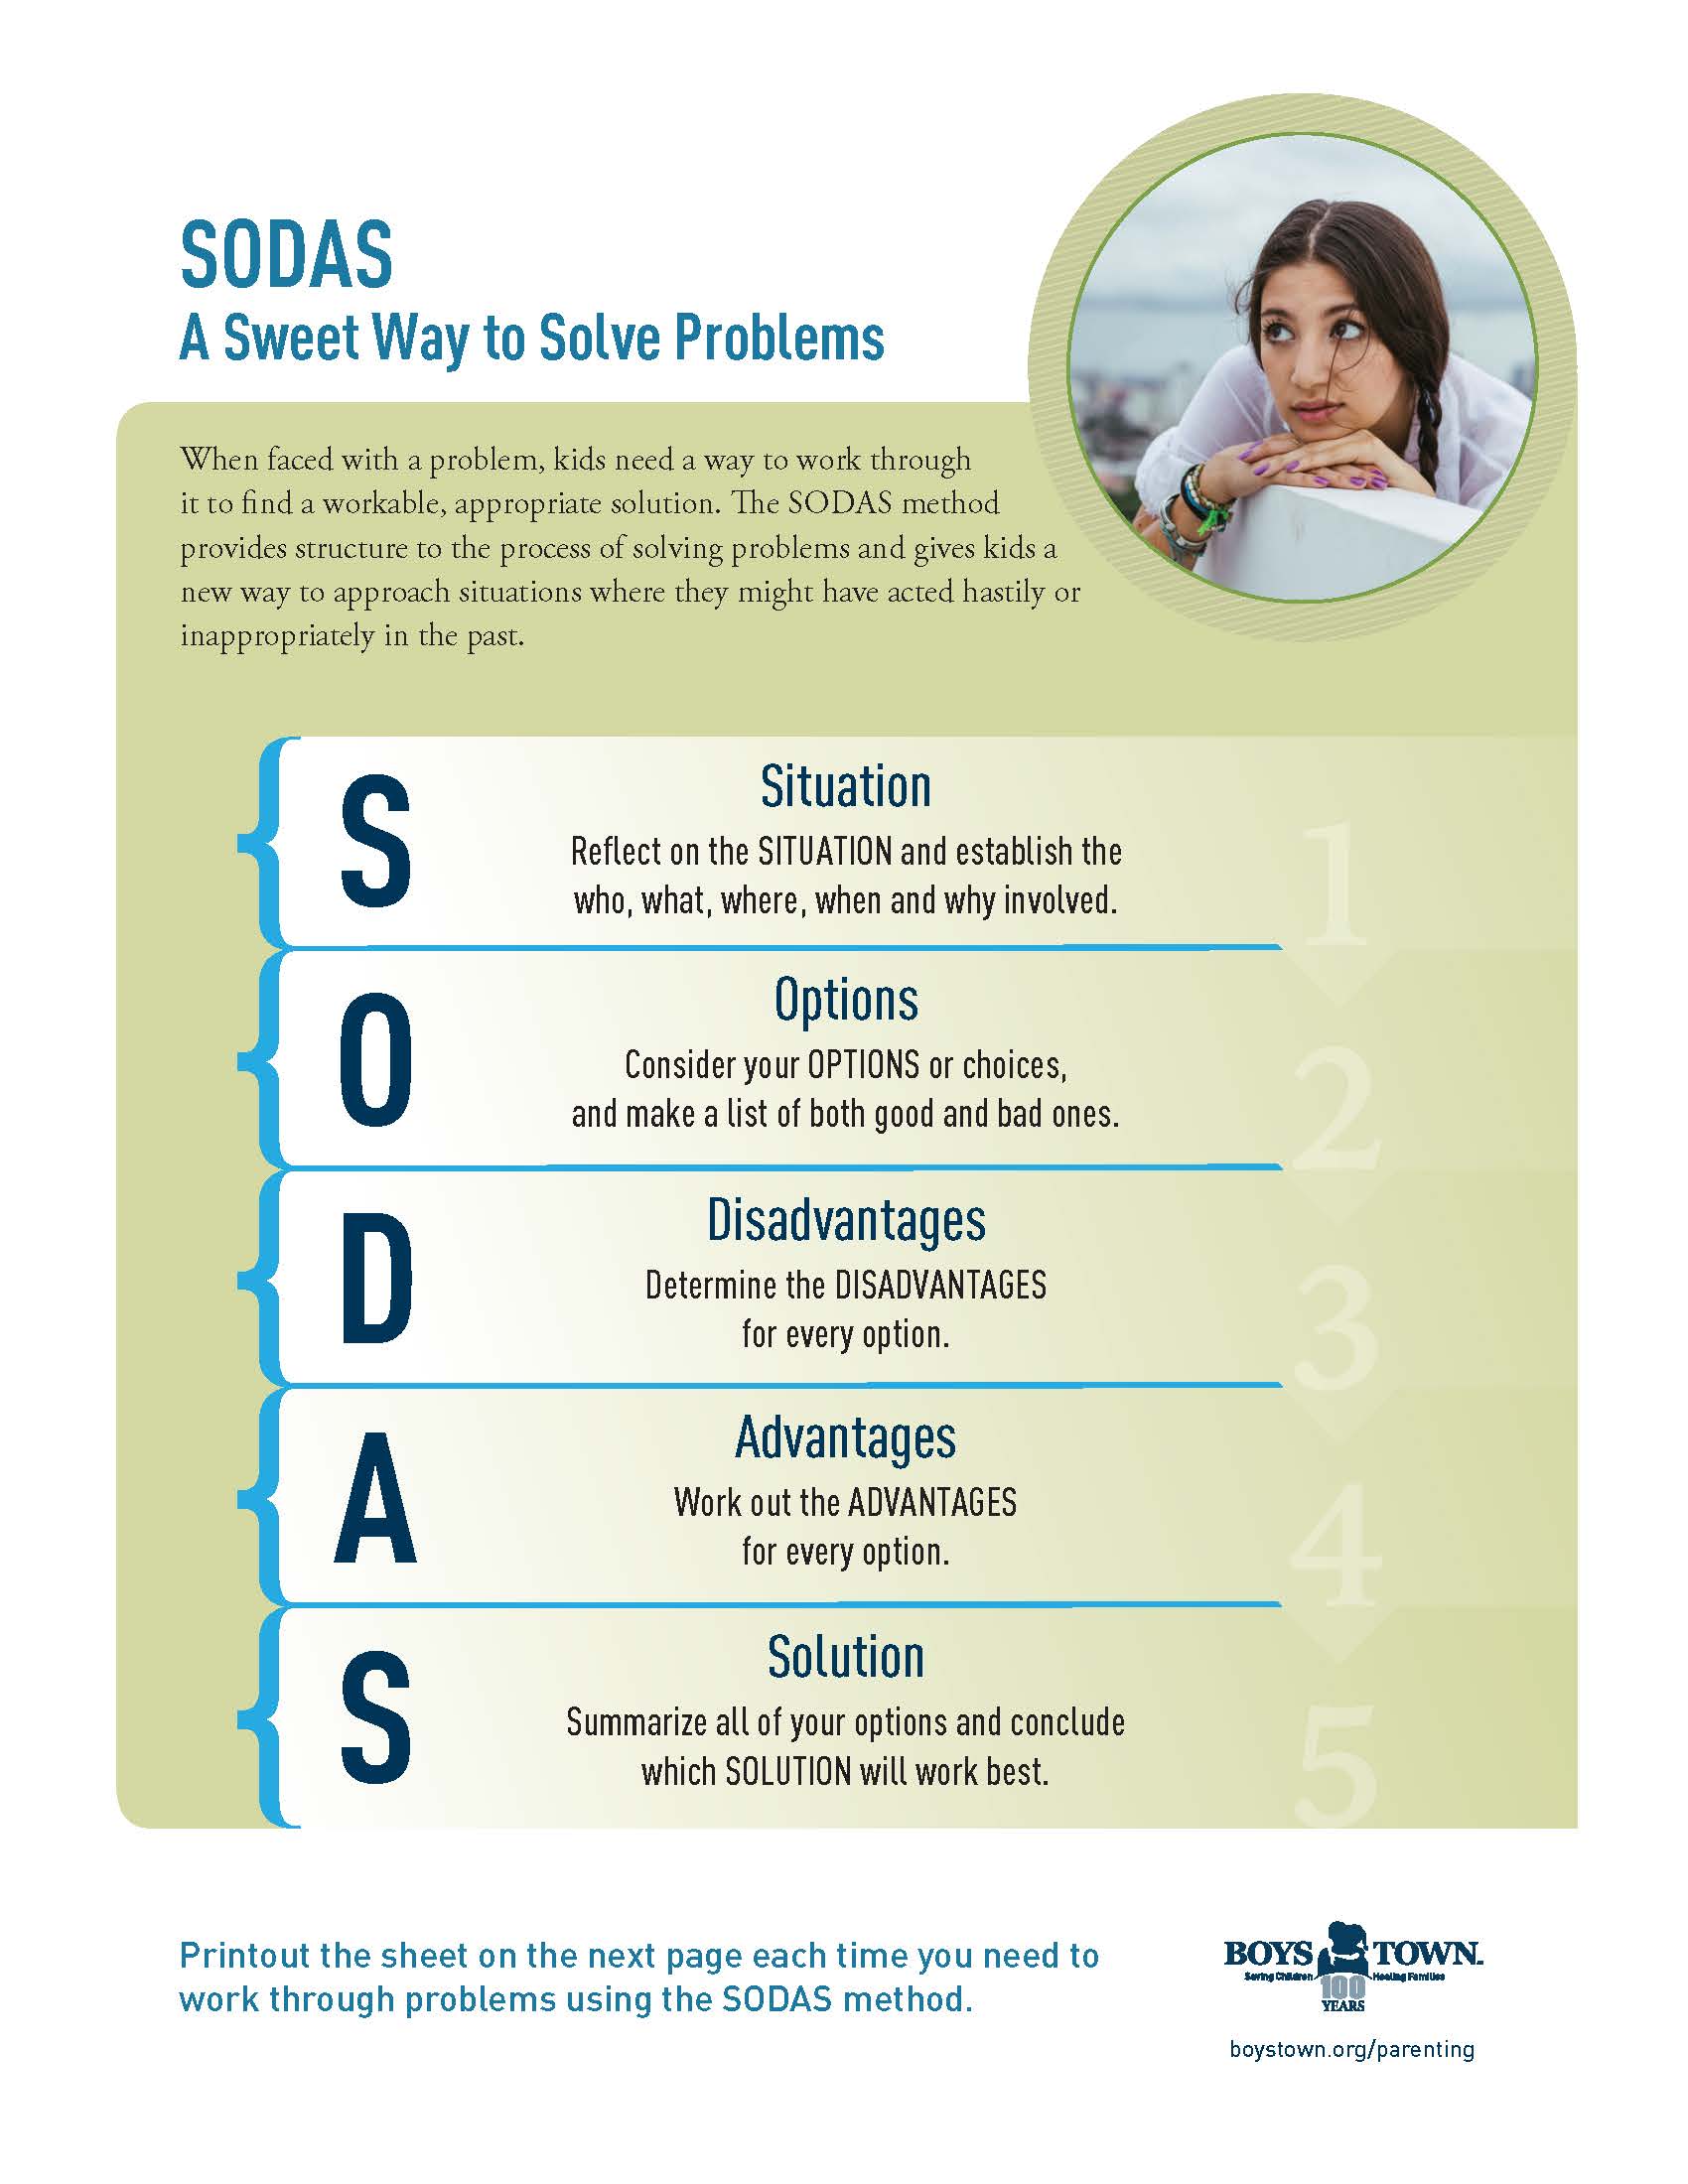 SODAS - A sweet way to solve problems flyer